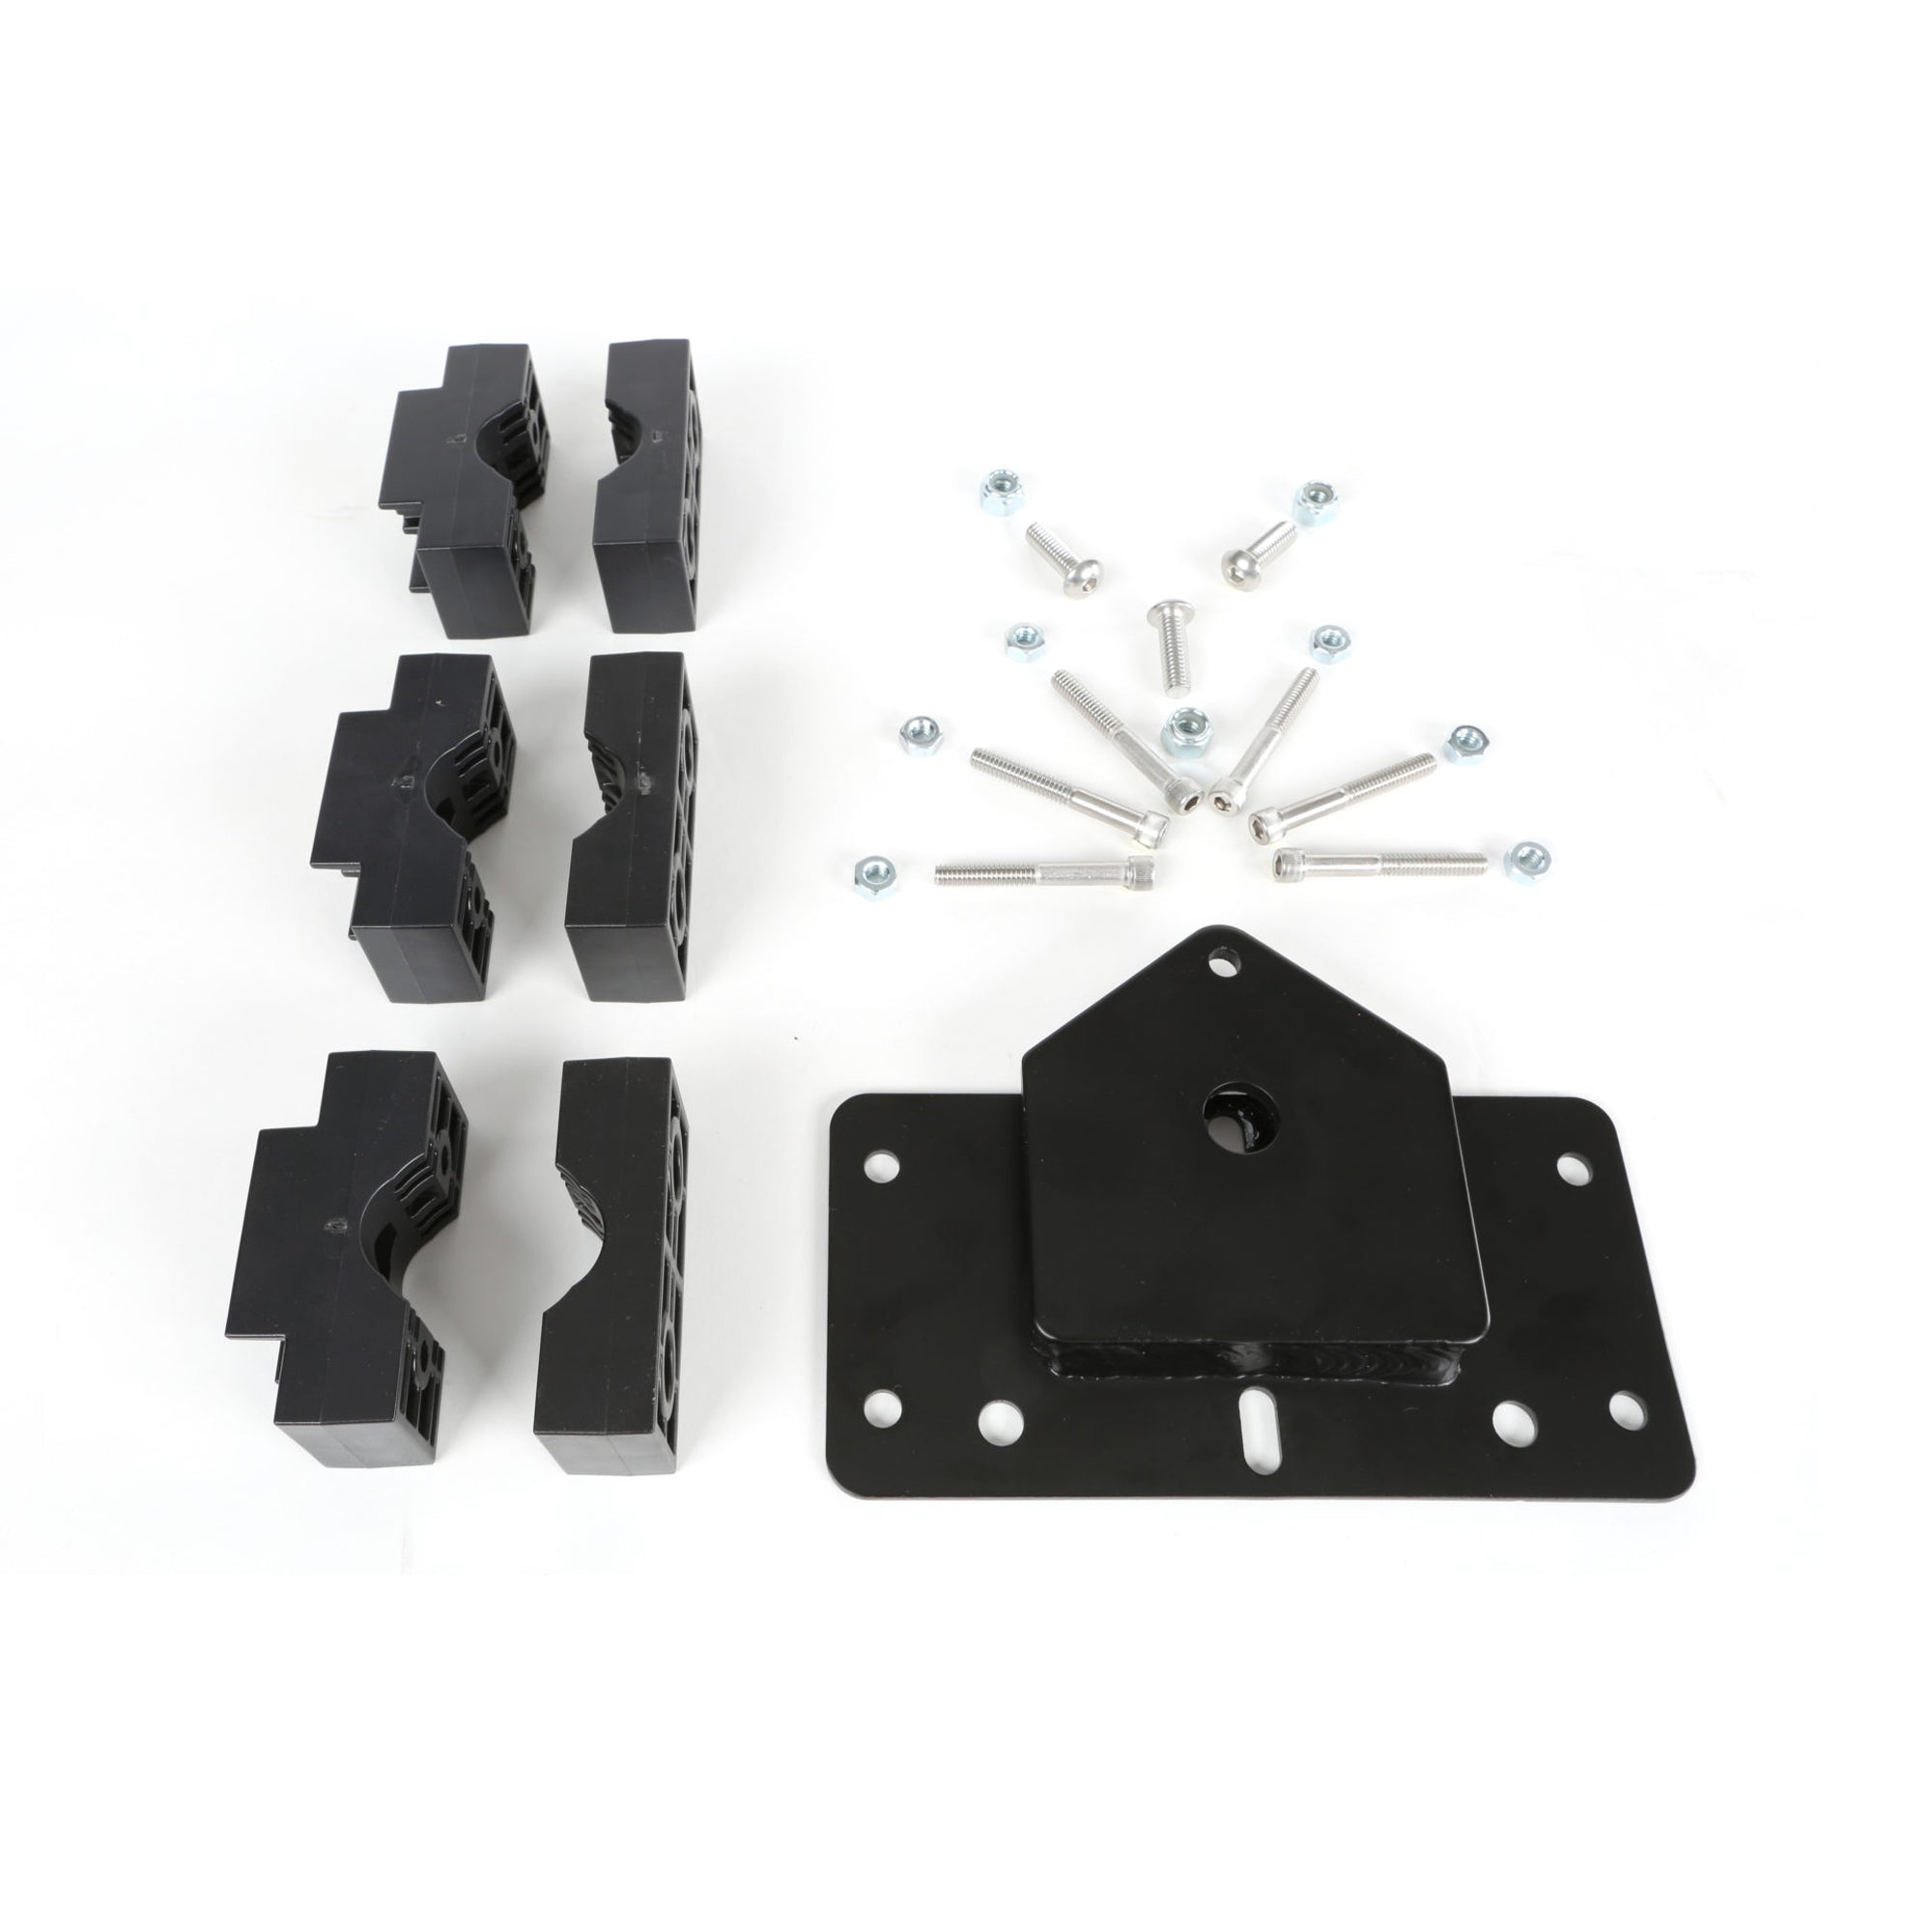 Bar Mount Kit, Package Content, Top Angle